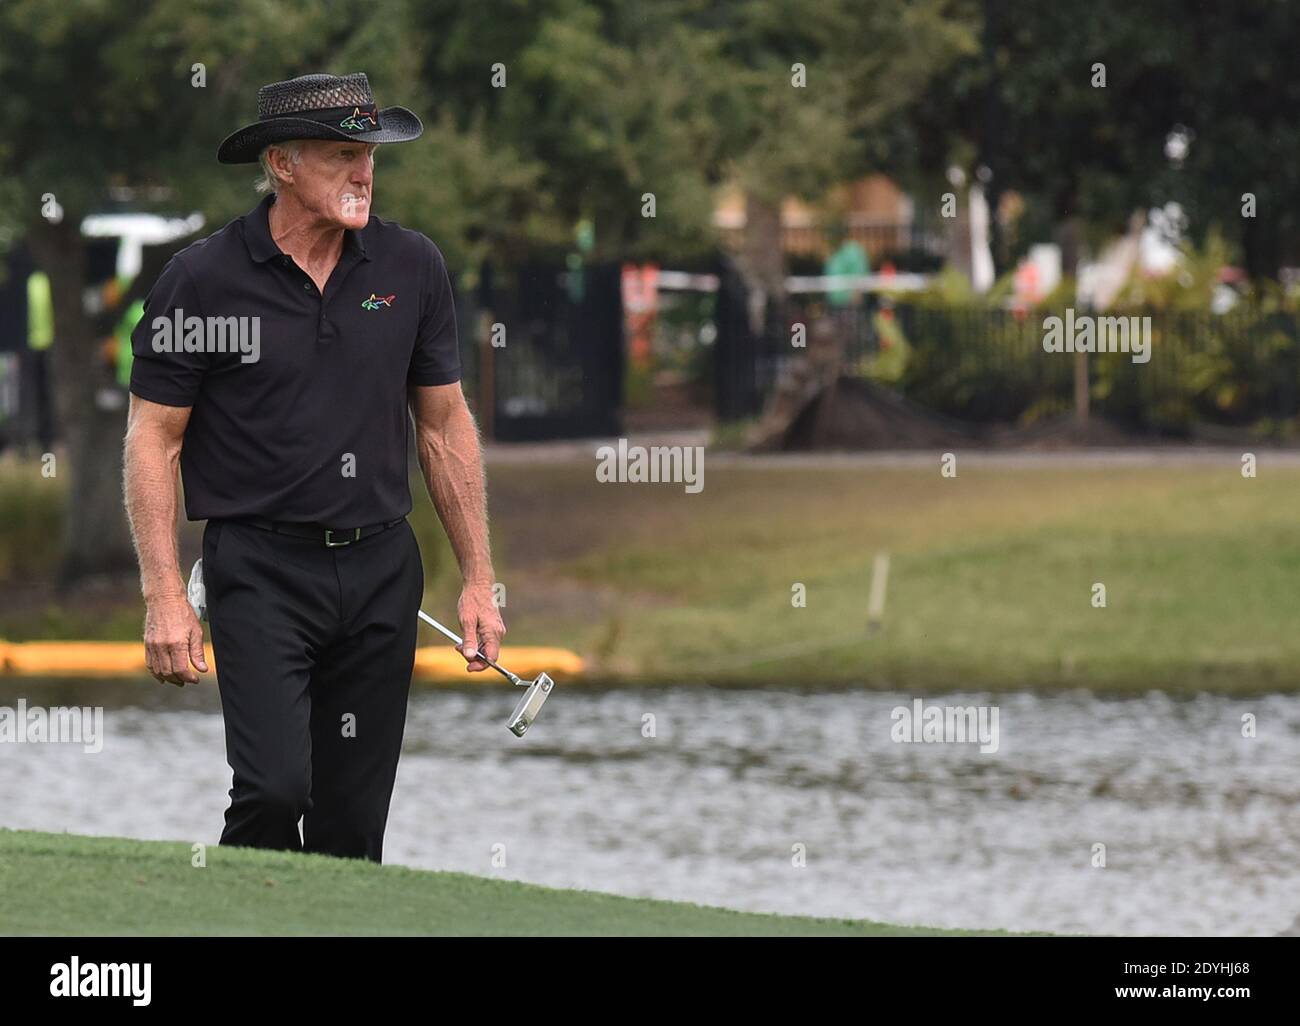 Australian Greg Norman approaches the 18th green during the final round at the PNC Championship golf tournament at the Ritz-Carlton Golf Club. On Christmas Day, Norman posted a photo on Instagram from a hospital bed where he was being treated for COVID-19 symptoms. Norman's son also posted a photo on Instagram, stating that he and his fiancée have tested positive for the COVID-19 virus. Stock Photo